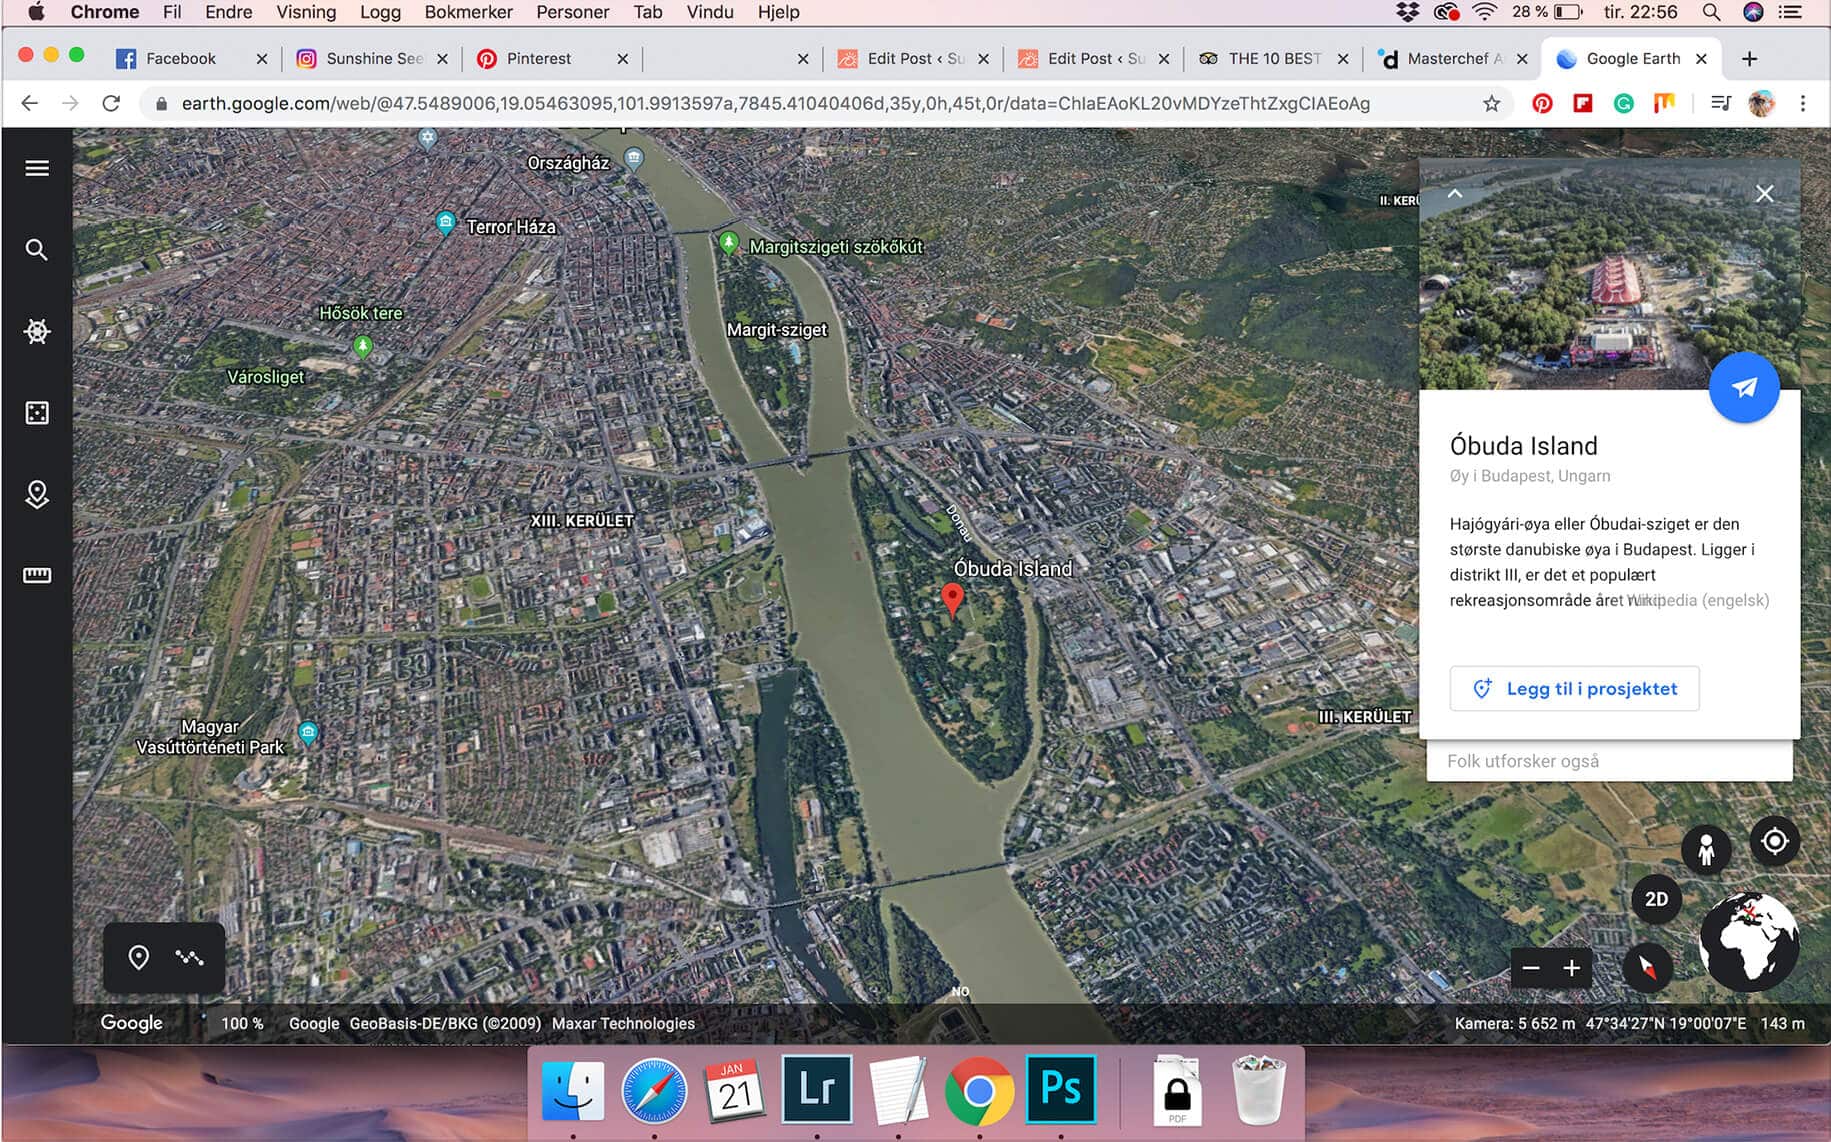 In an effort to be more spontaneous we let Google Earth choose our destination - And we ended up in Budapest